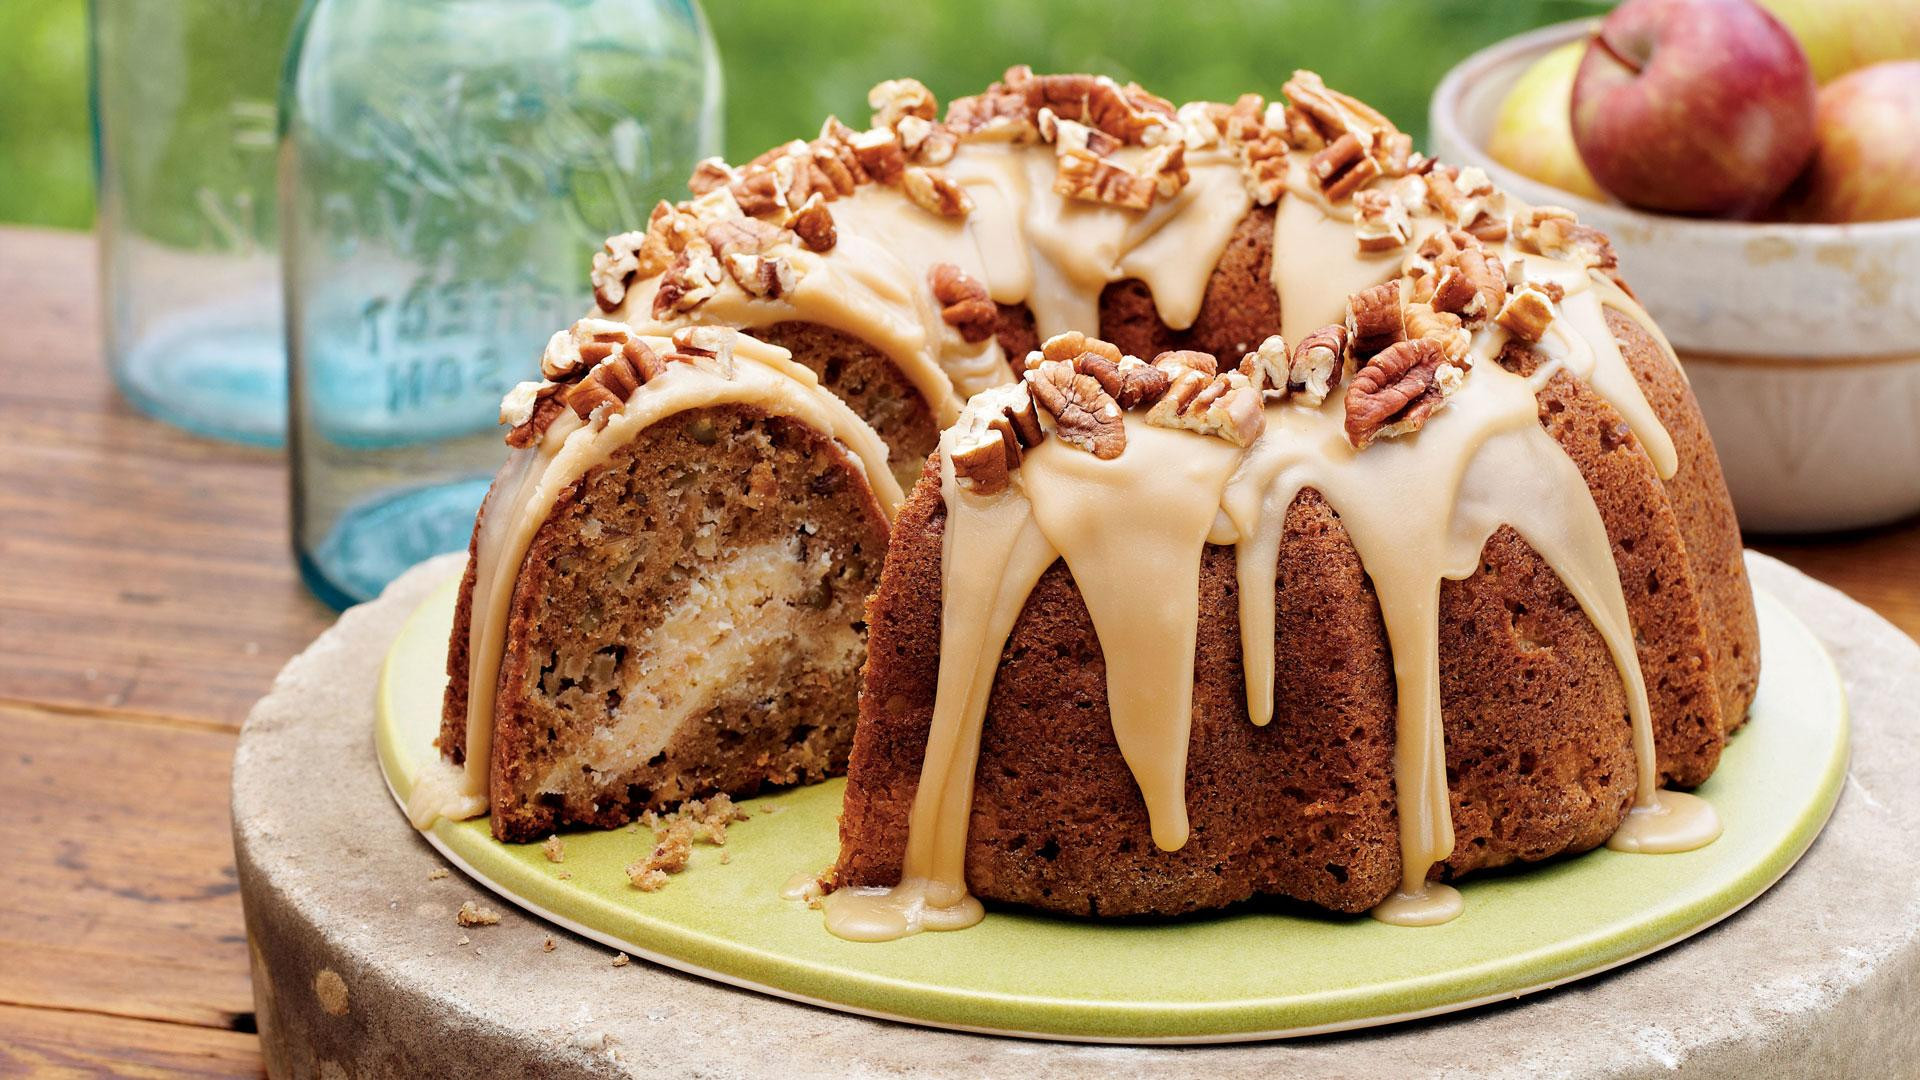 Brown Sugar Pound Cake Southern Living
 Apple and Pear Crisp Recipe Southern Living